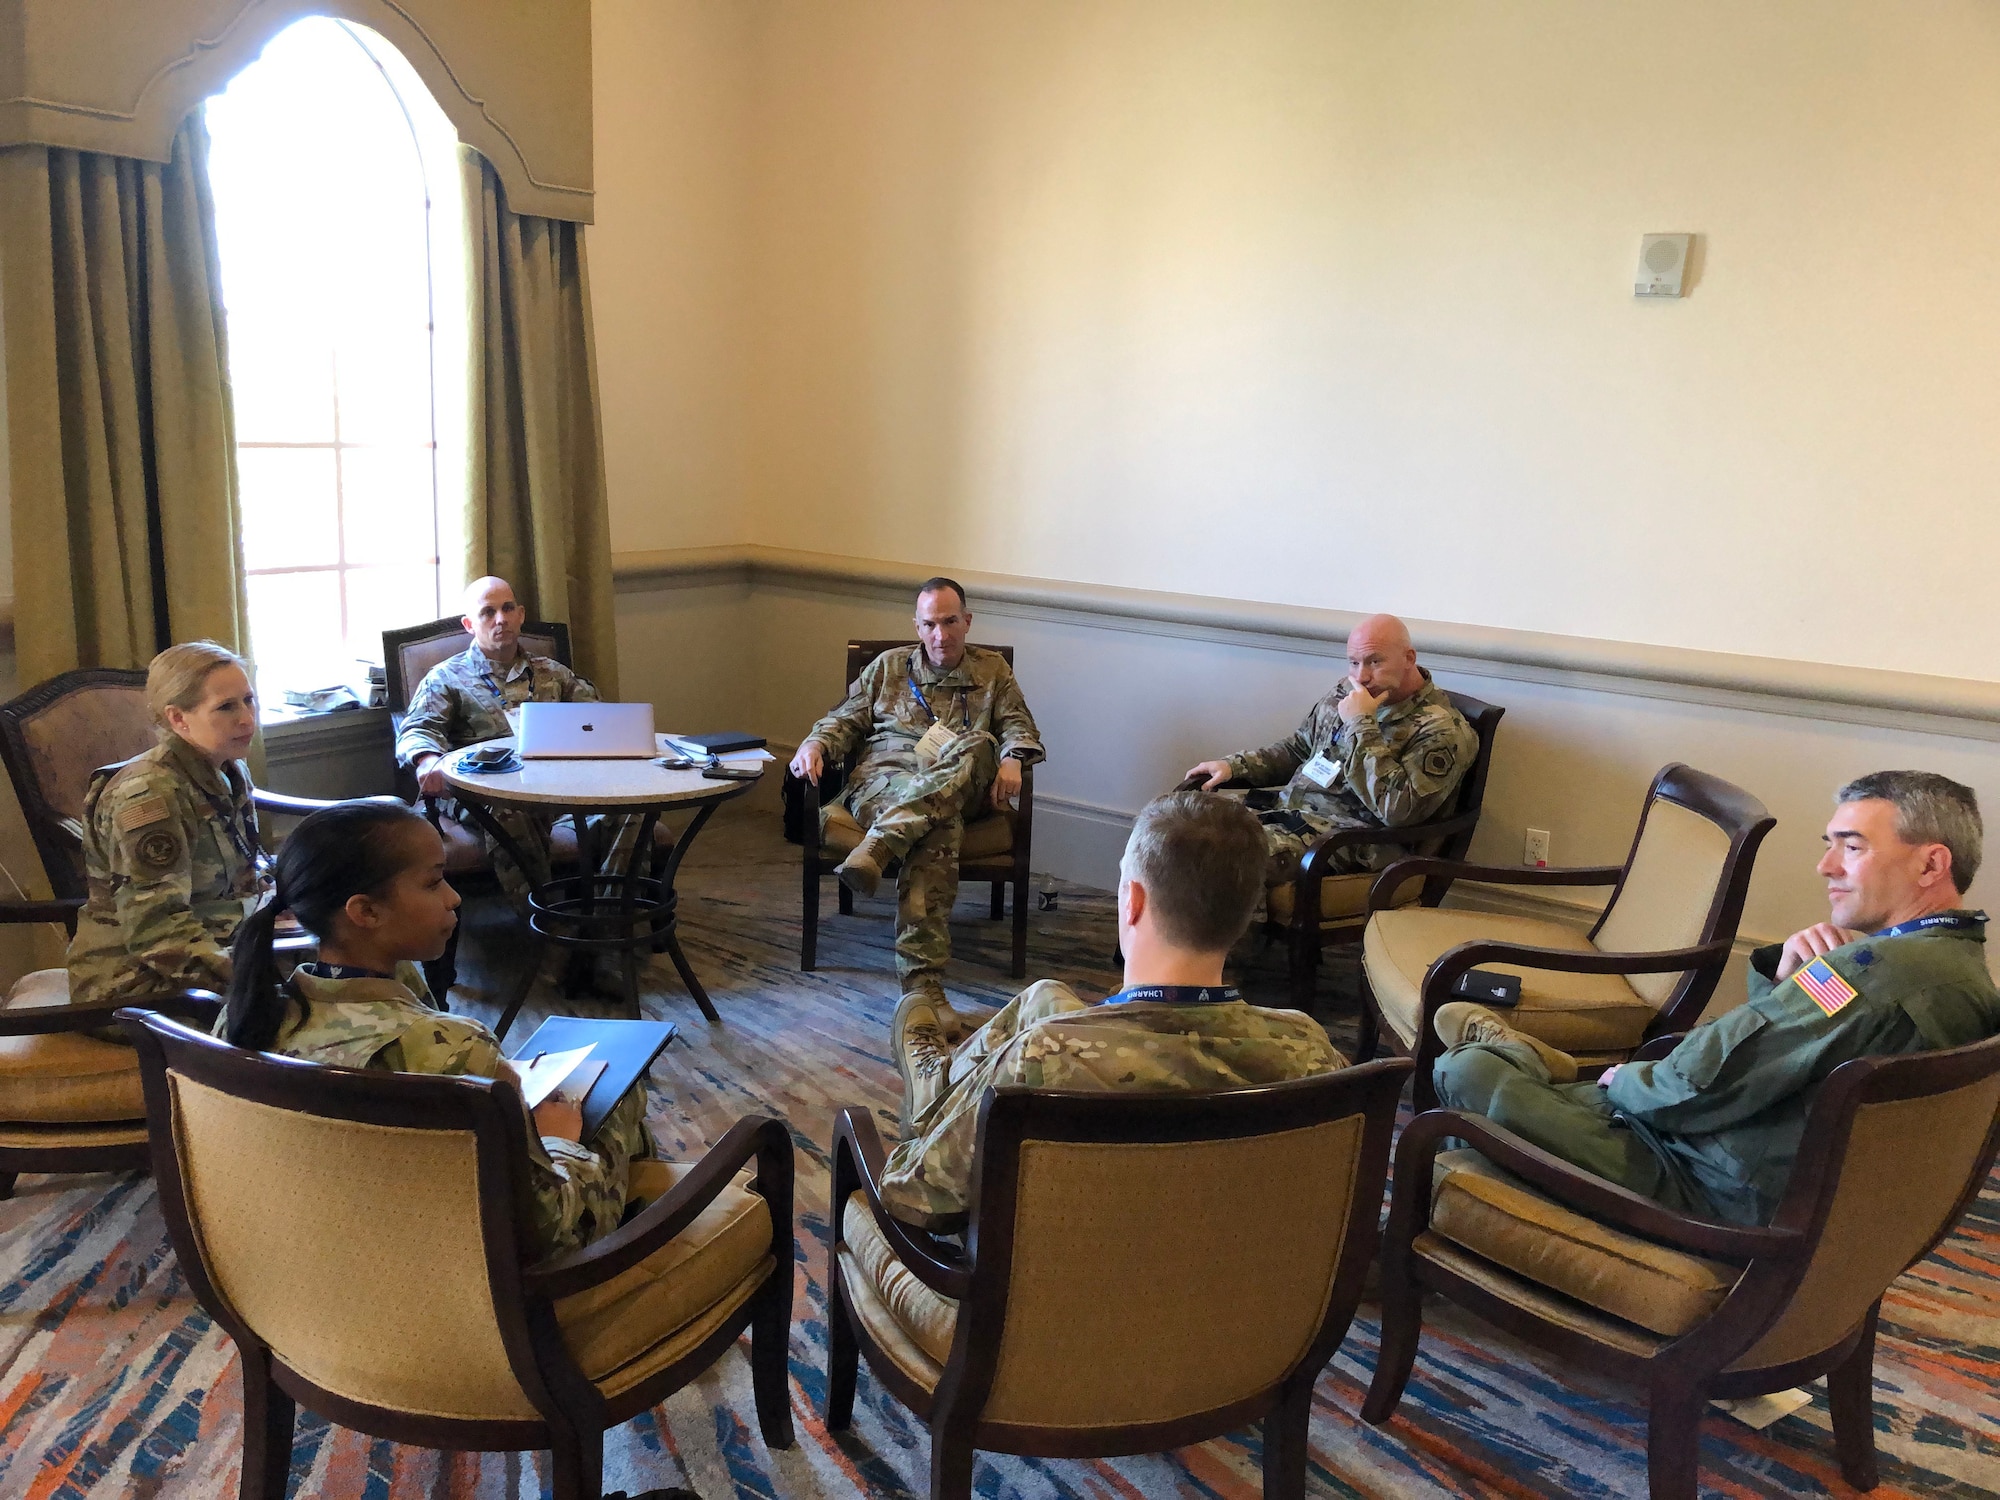 Seven Air Force members sit in a circle talking together.